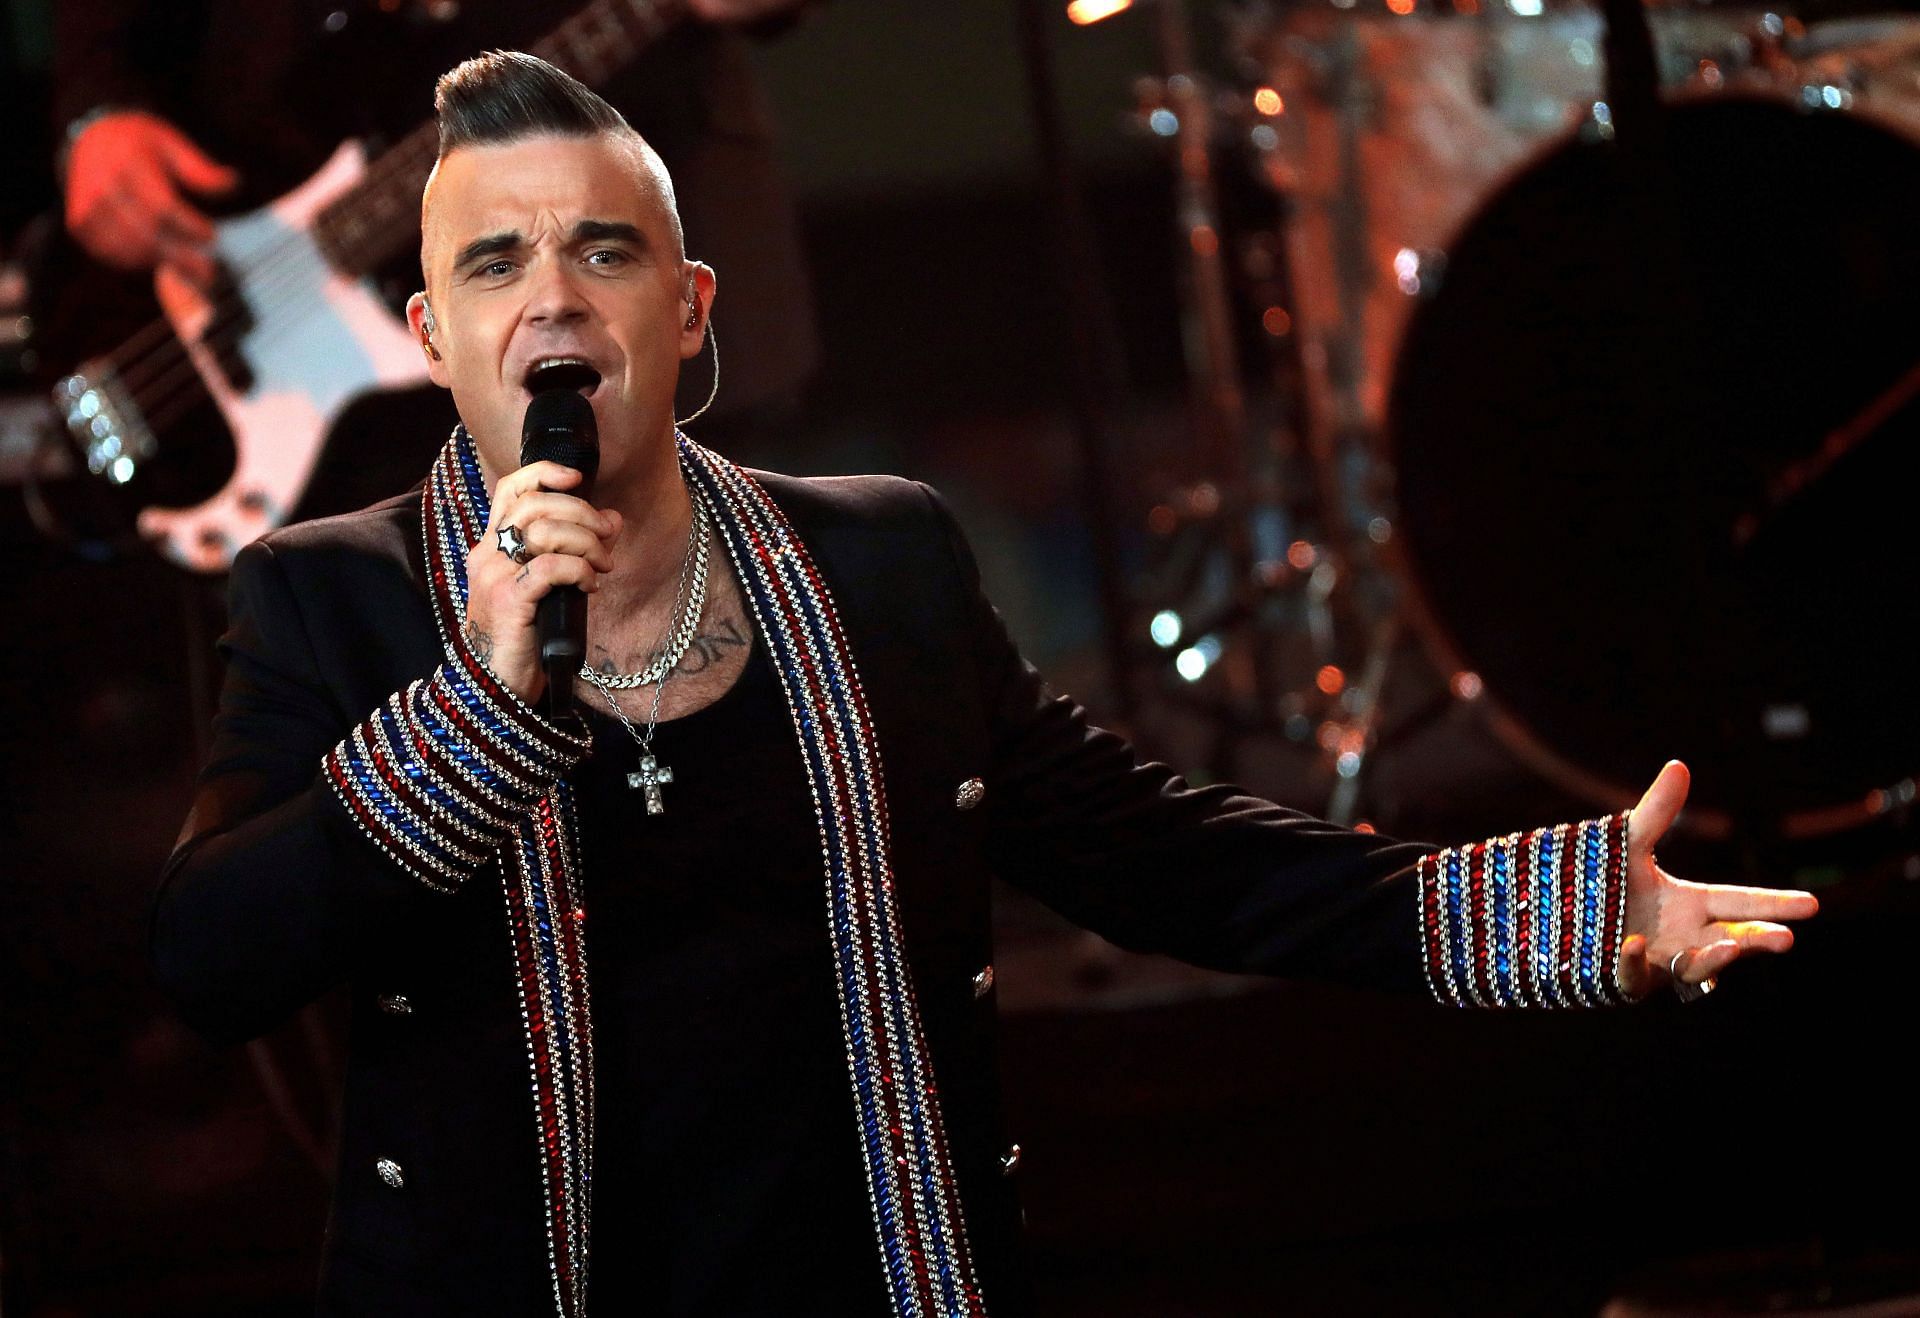 Robbie Williams rose to fame following his tenure in boy band Take That (Image via Getty Images)